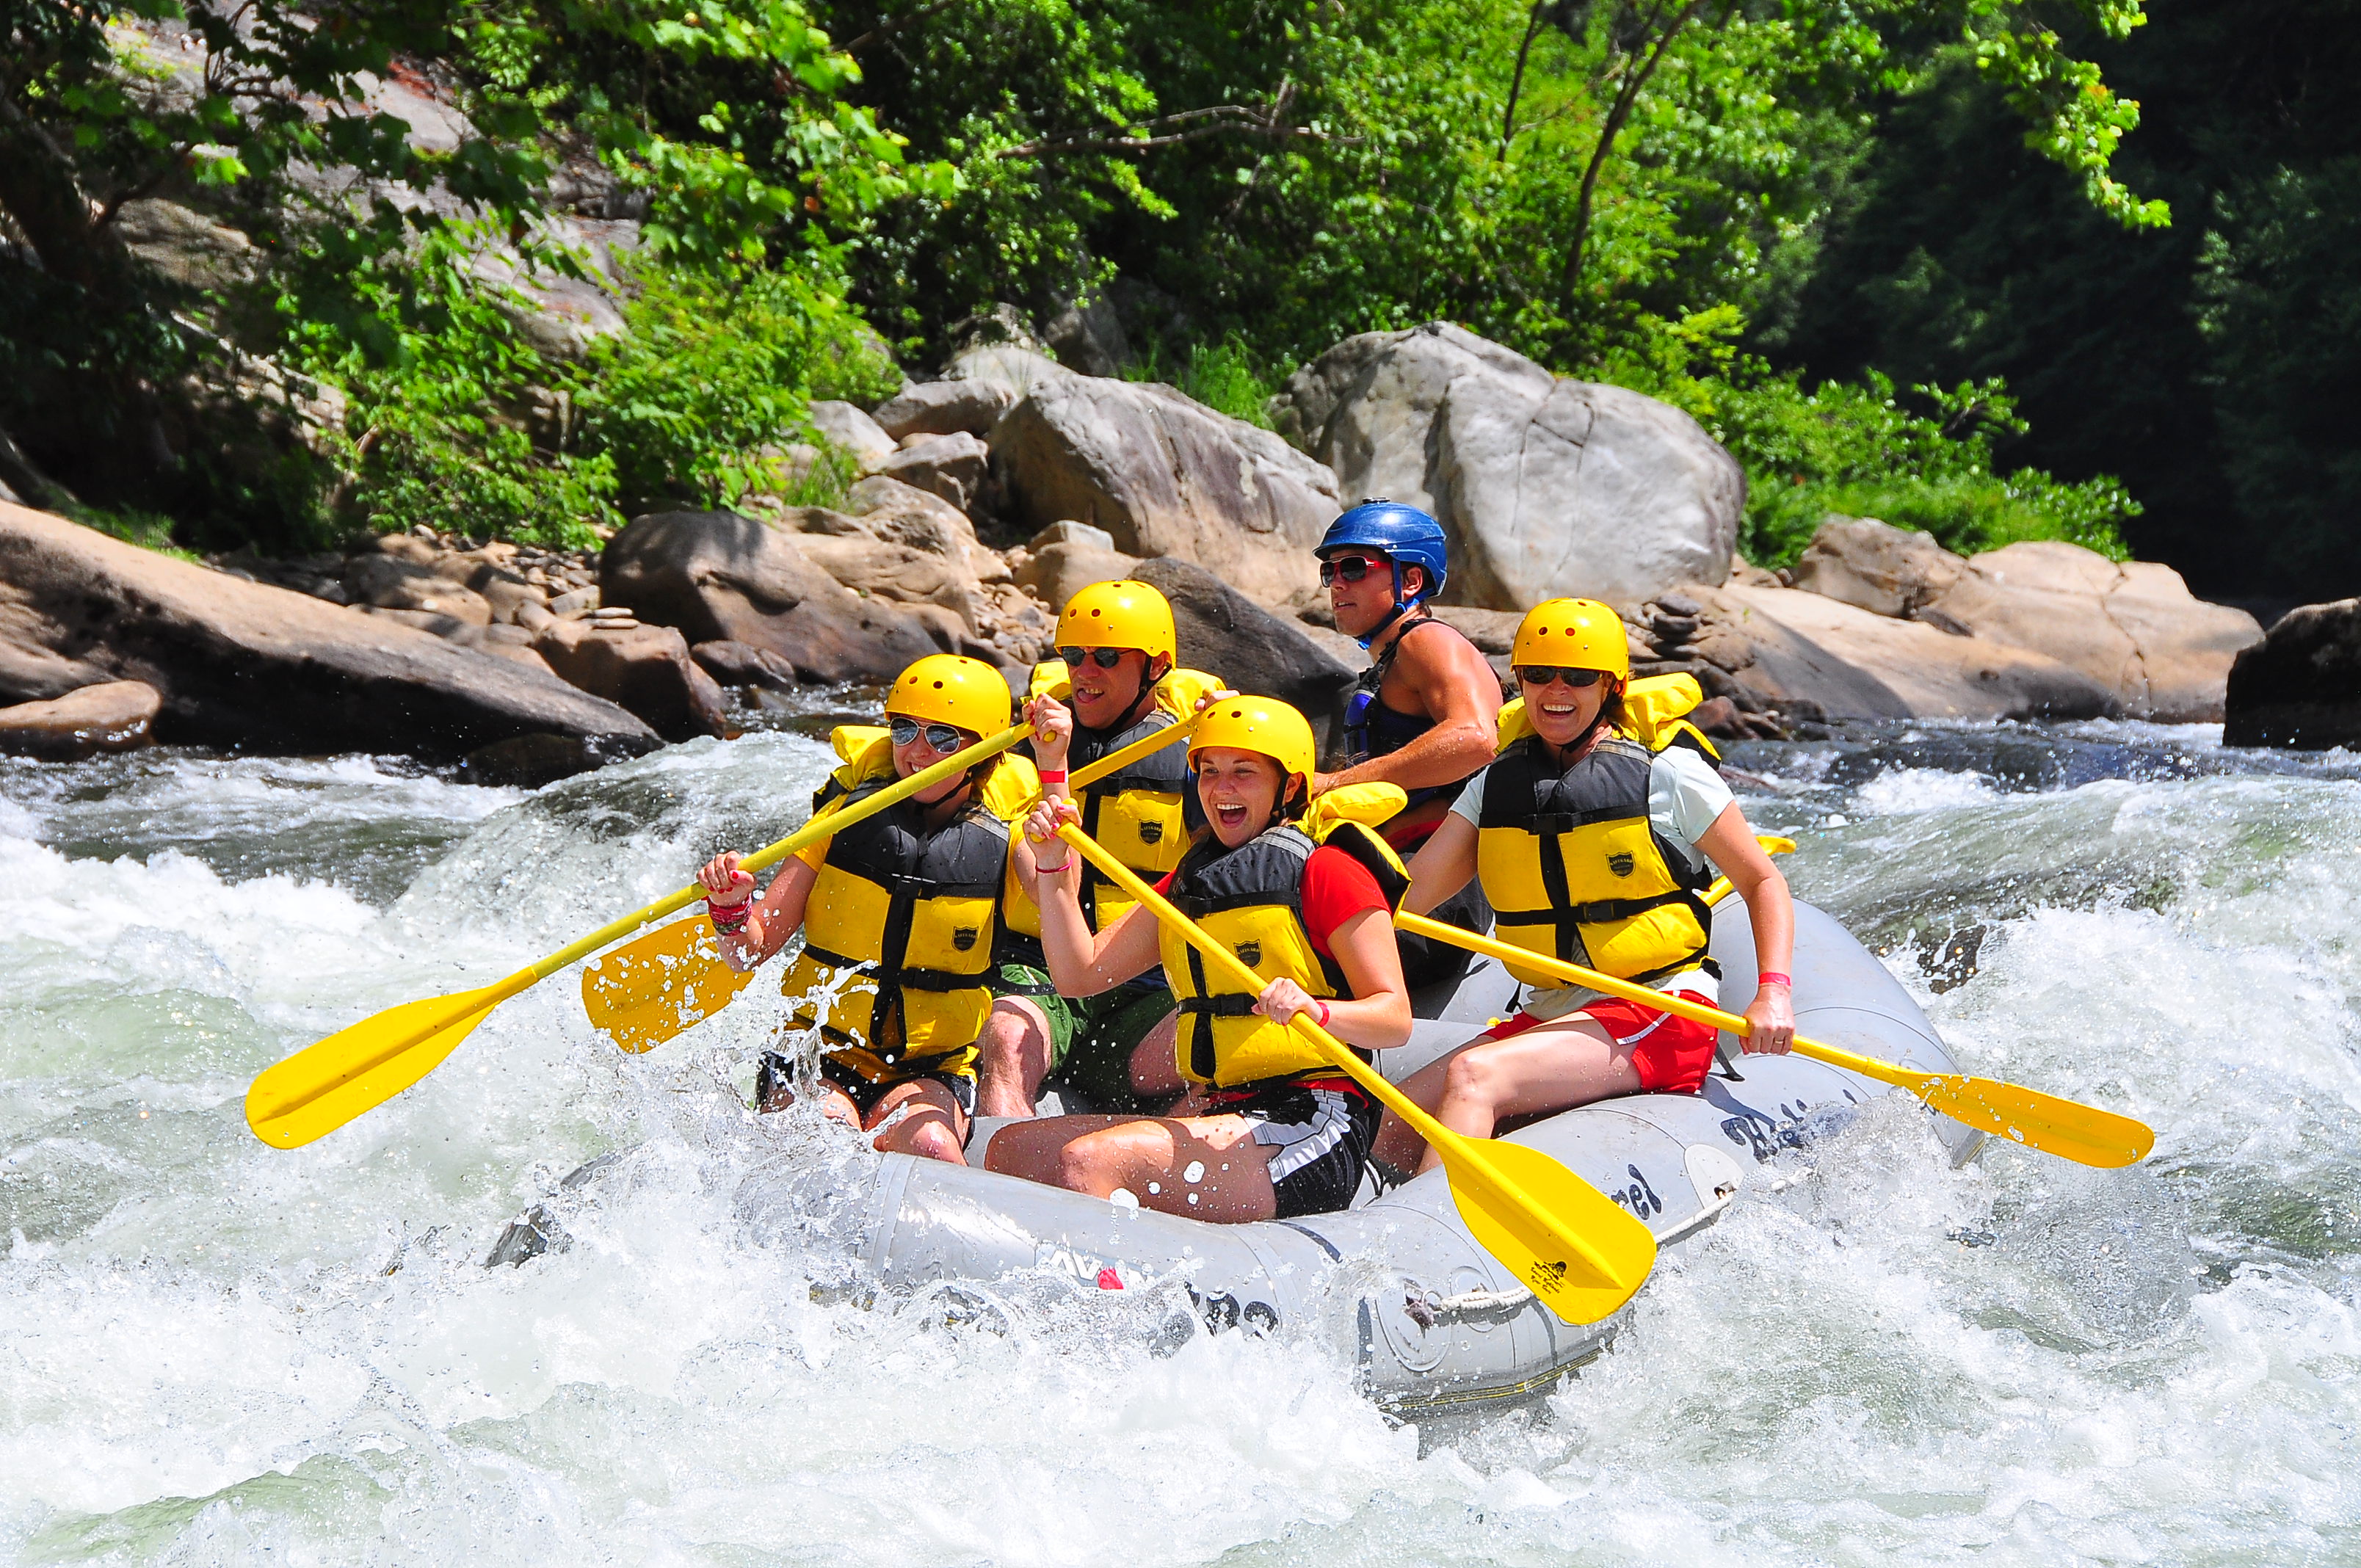 A group of rafters enjoying the adrenaline rush of whitewater rafting on the Youghiogheny River